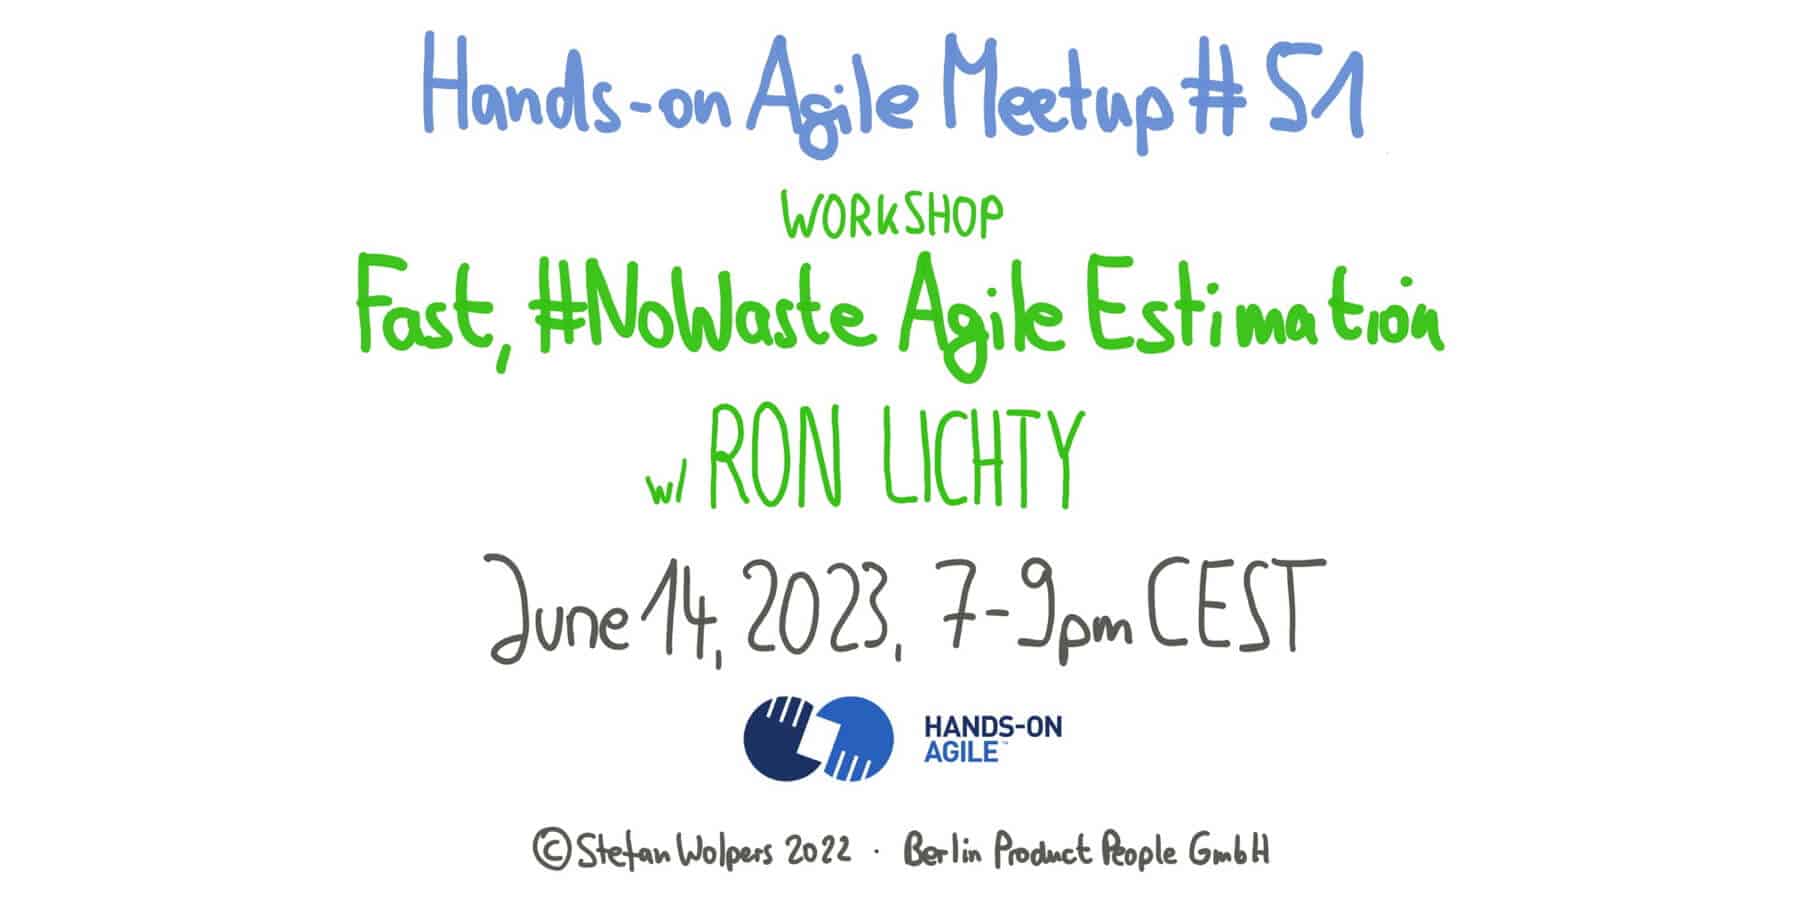 Hands-on Agile #51: #NoWaste Agile Estimating with Ron Lichty — June 14, 2023 — Berlin Product People GmbH